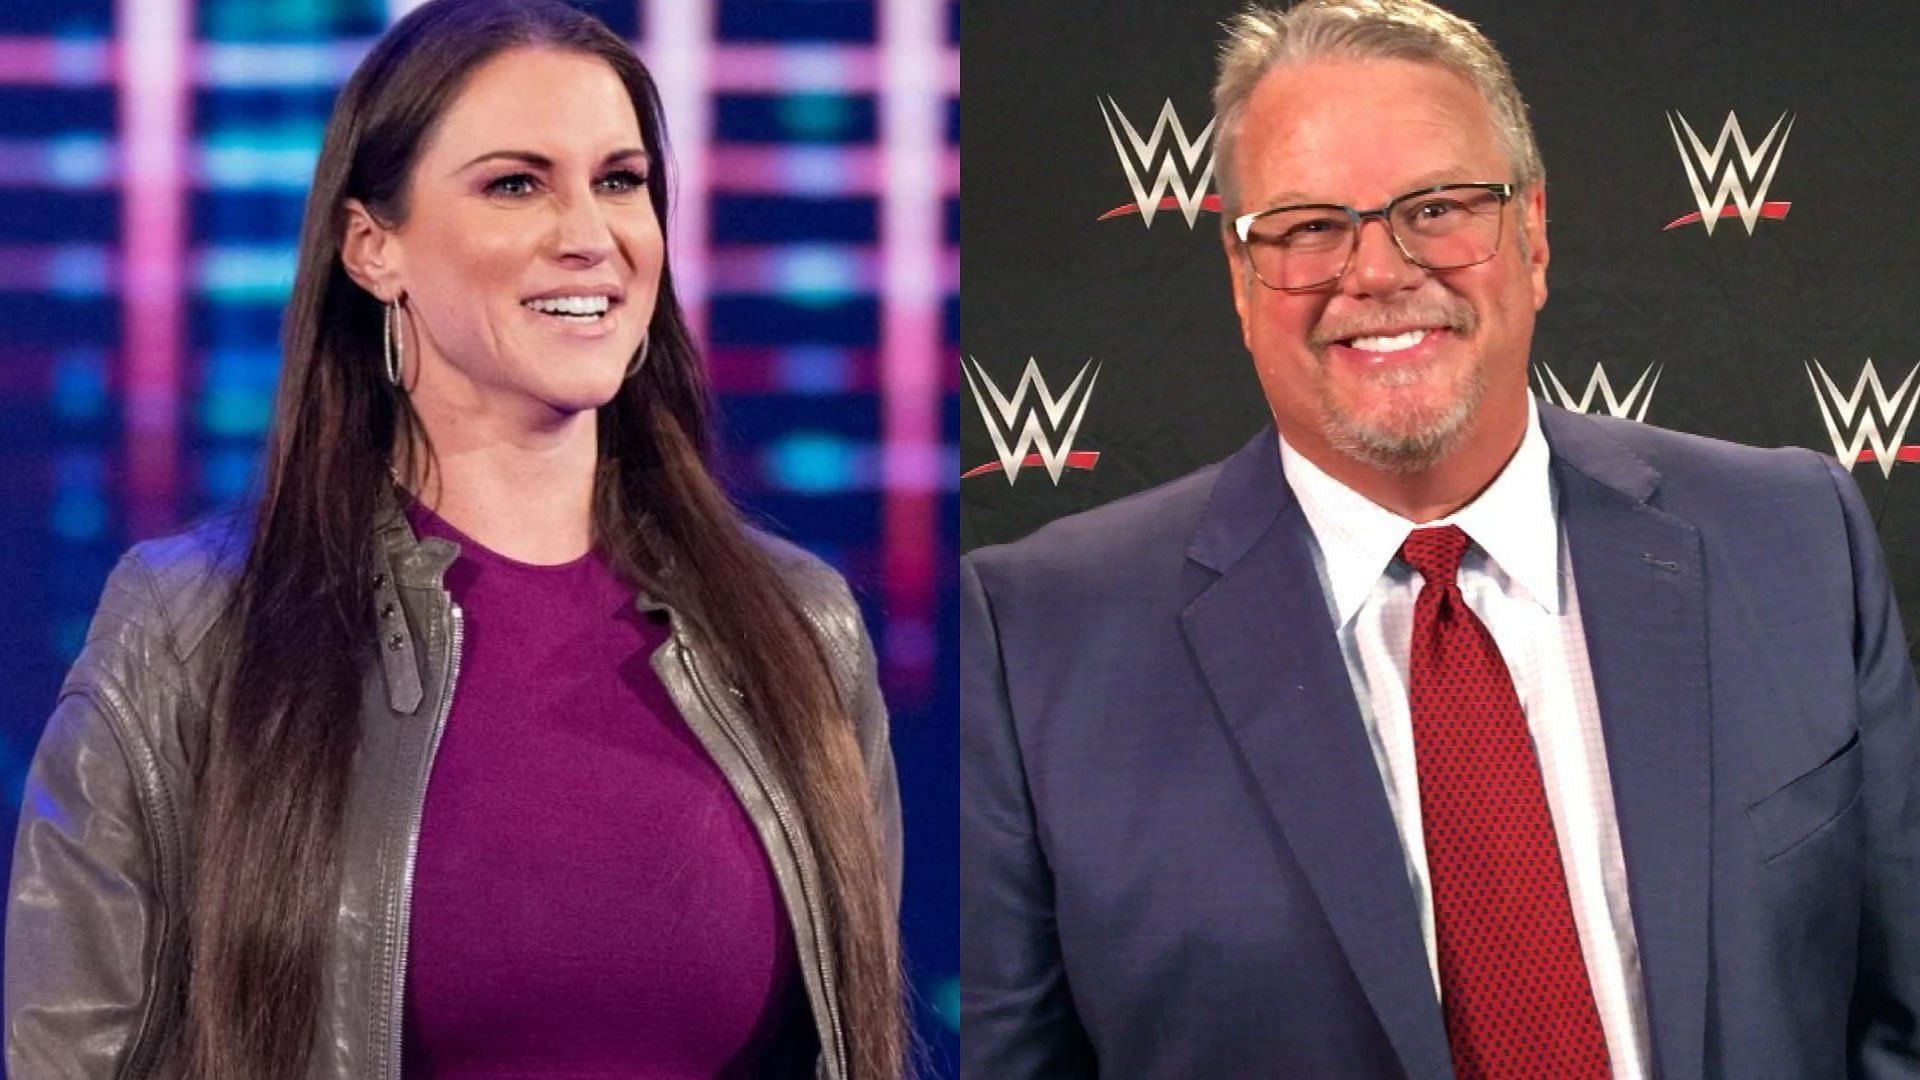 Stephanie McMahon (left) and Bruce Prichard (right)